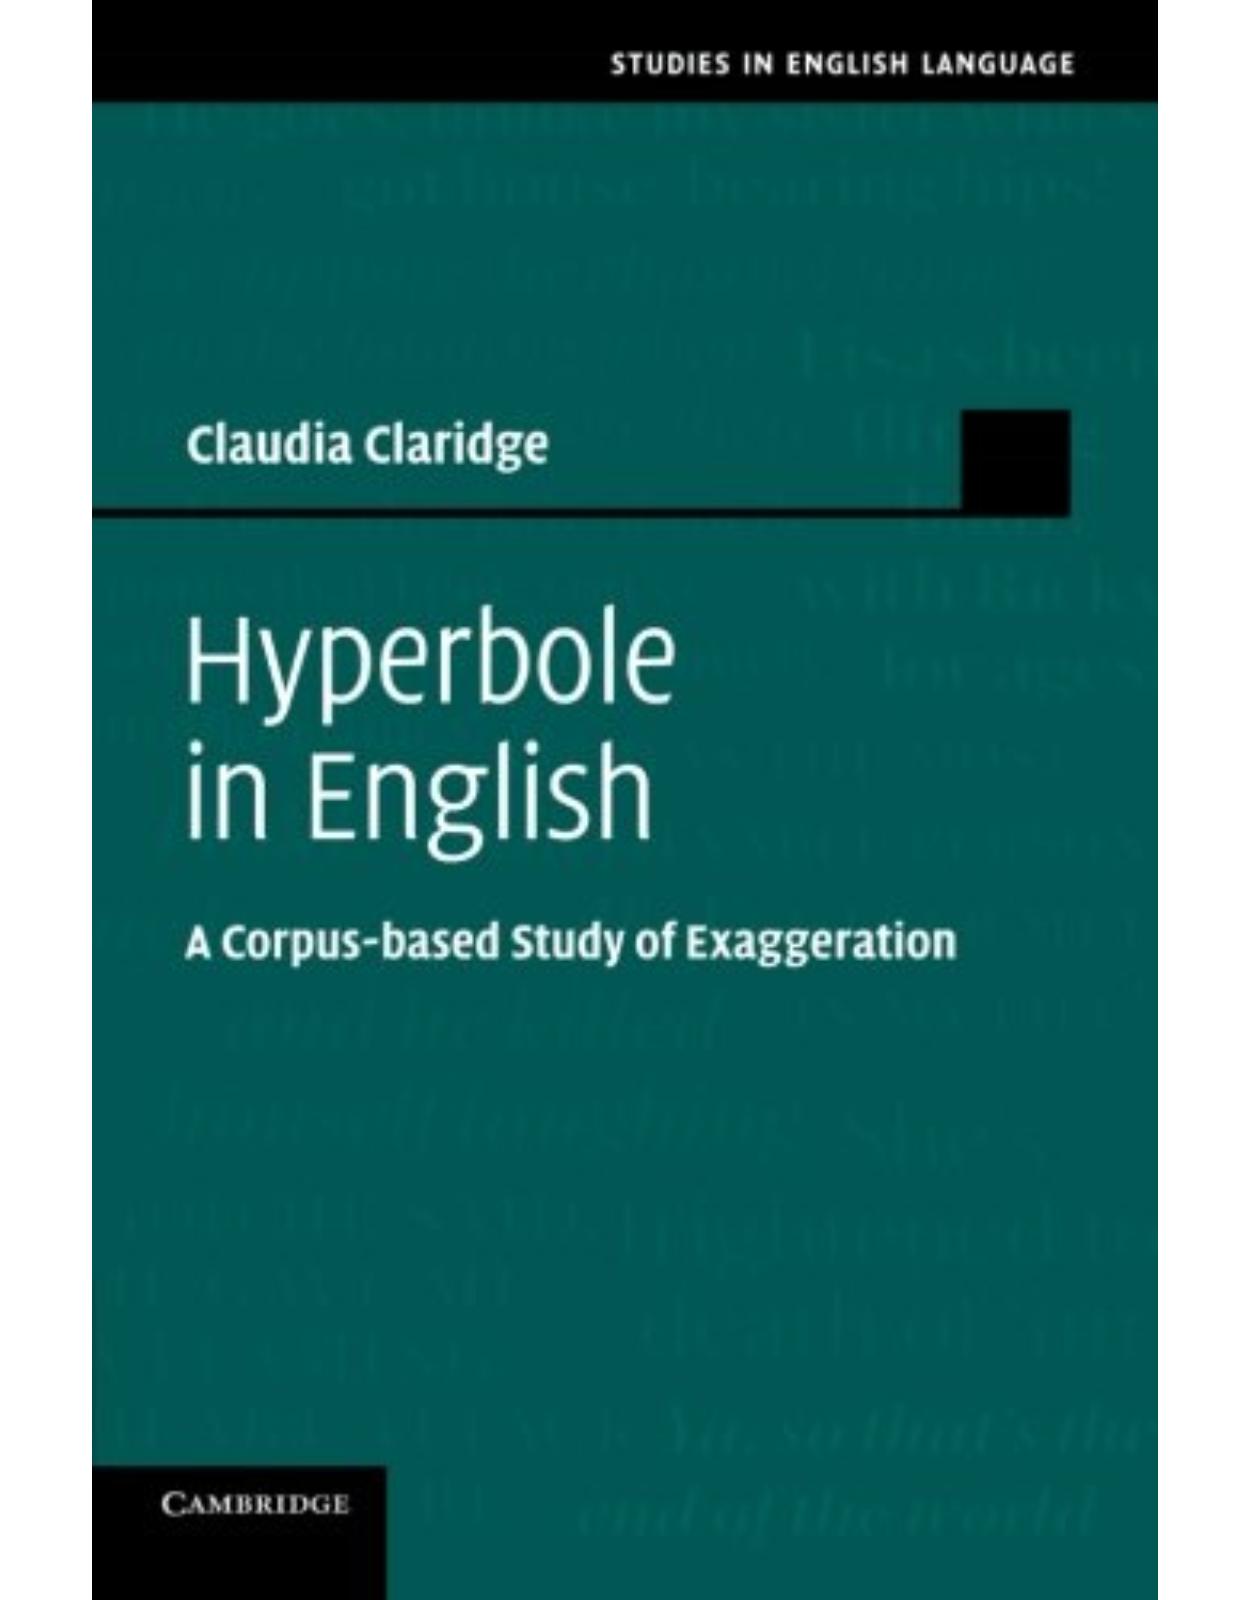 Hyperbole in English: A Corpus-based Study of Exaggeration (Studies in English Language)